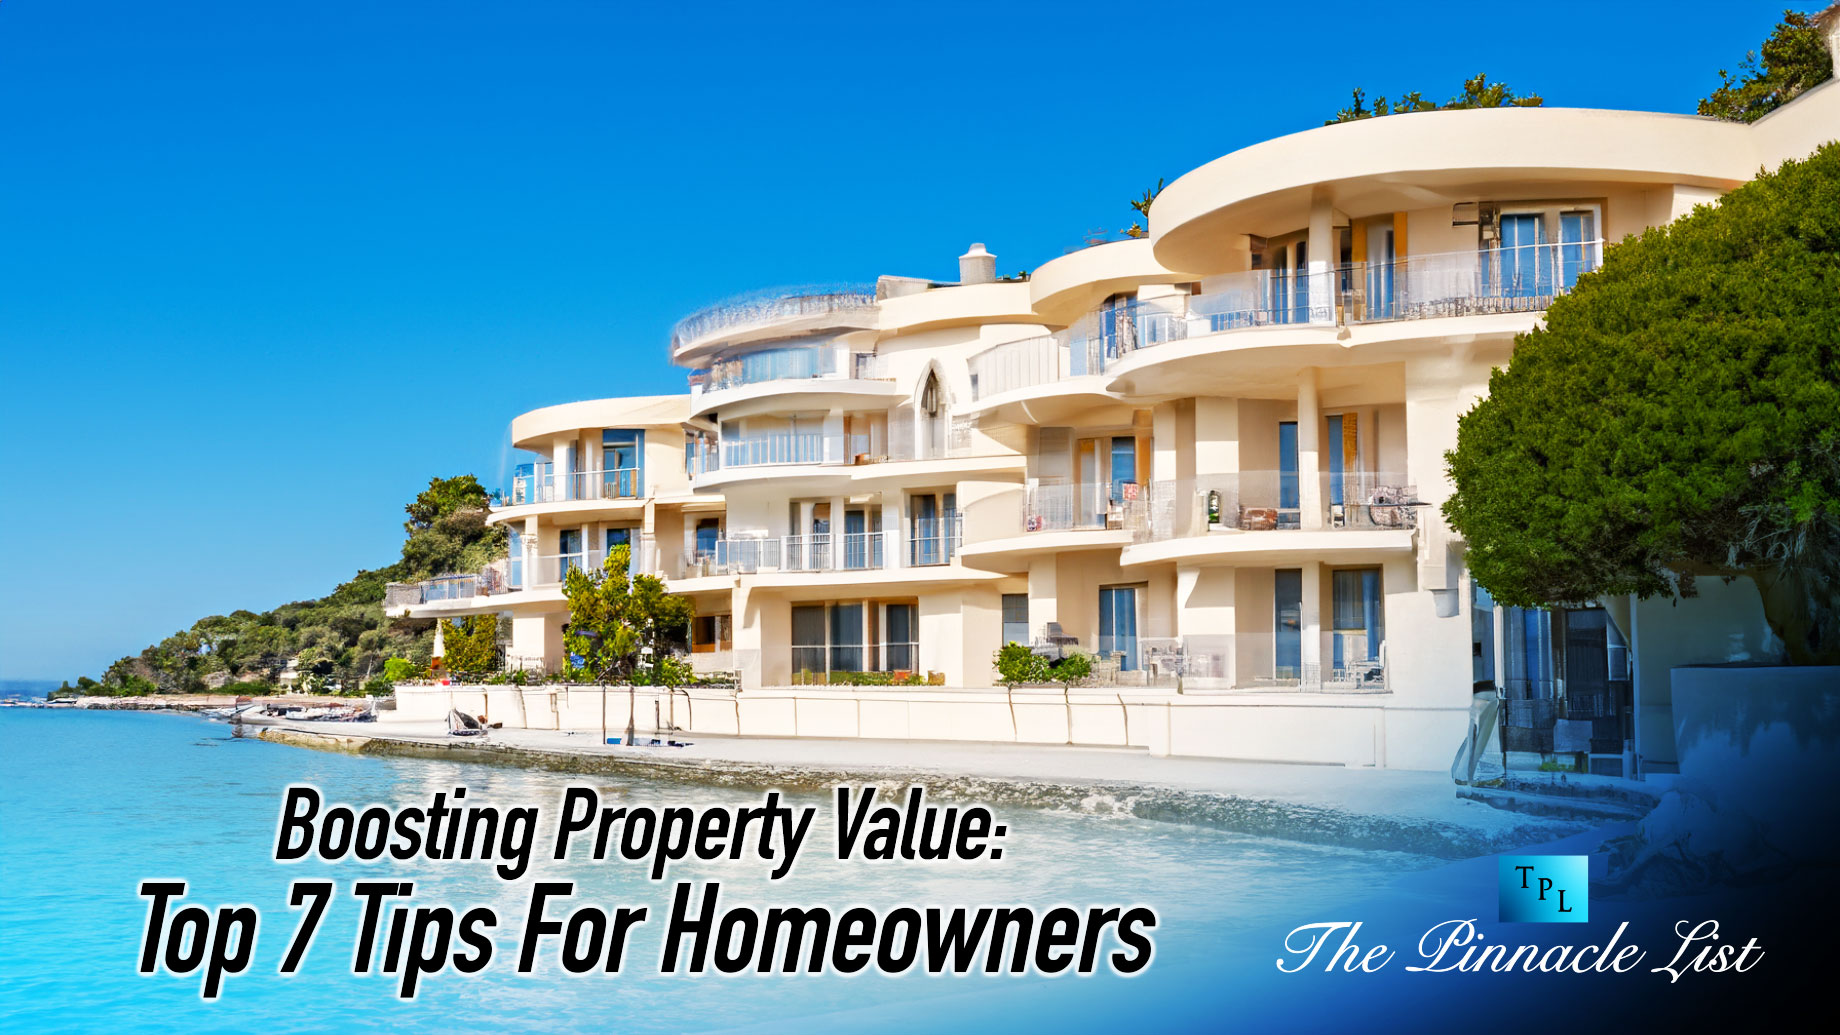 Boosting Property Value: Top 7 Tips For Homeowners